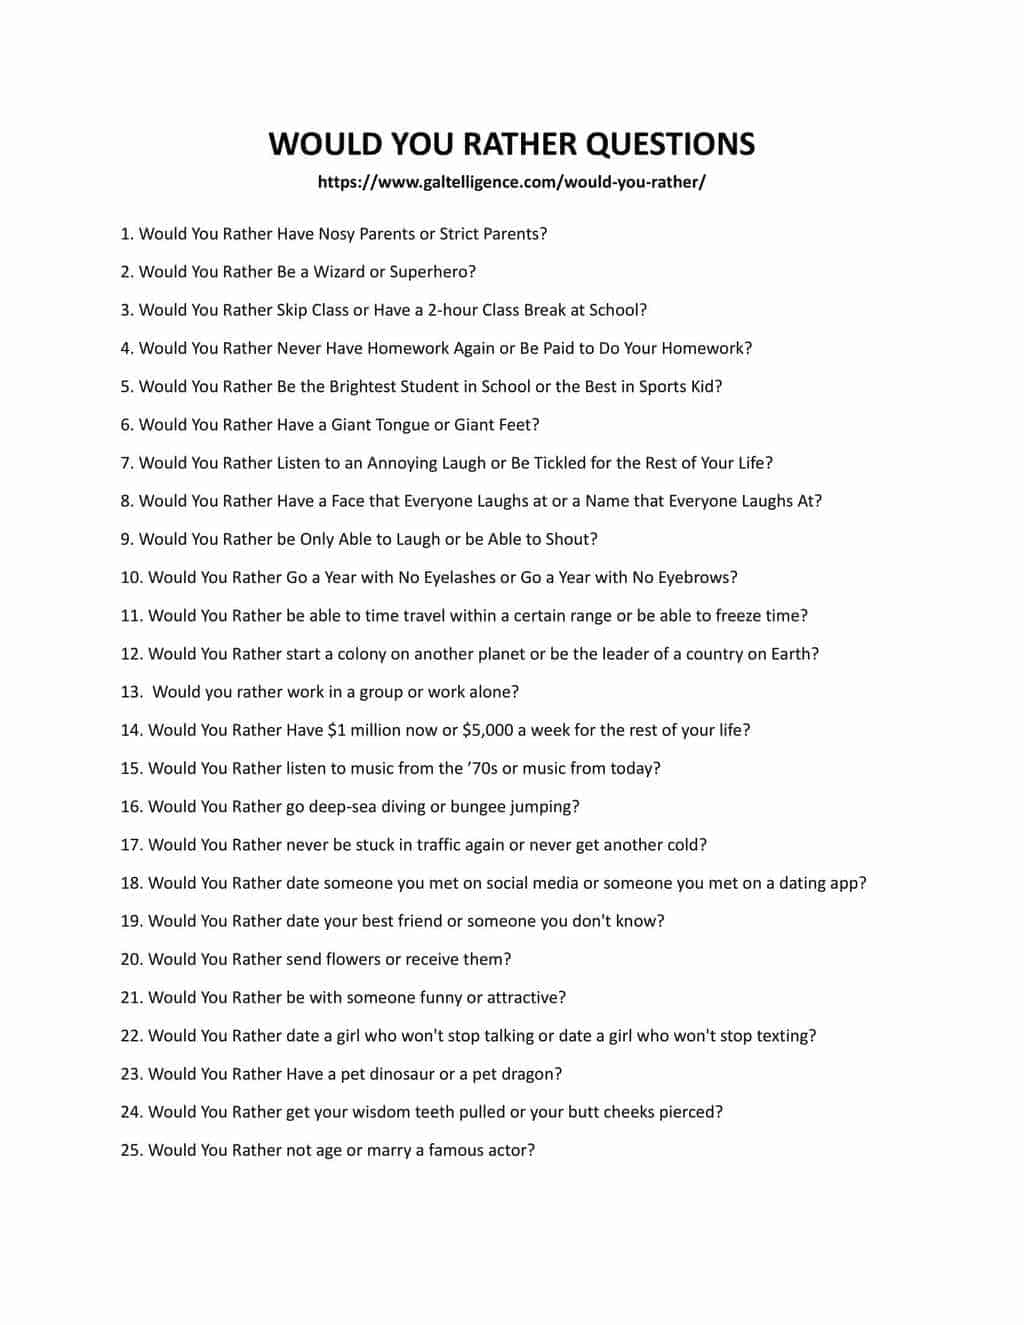 Downloadable list of questions